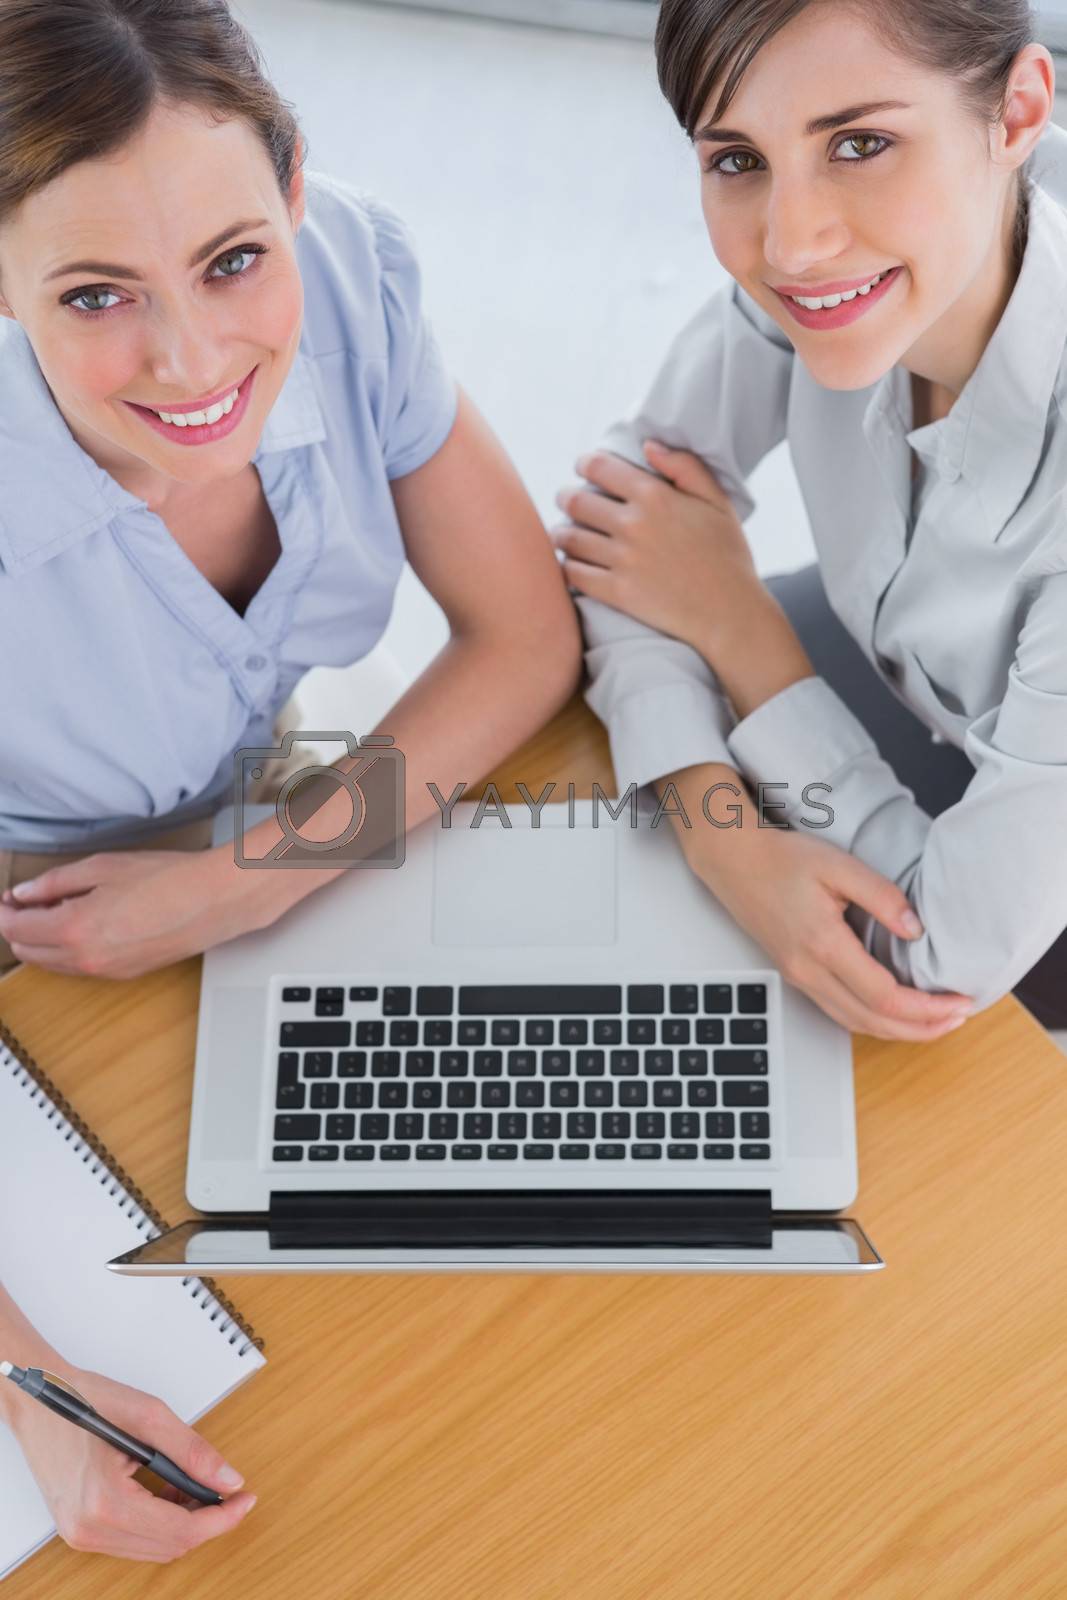 Royalty free image of Businesswomen having a meeting and smiling up at camera by Wavebreakmedia